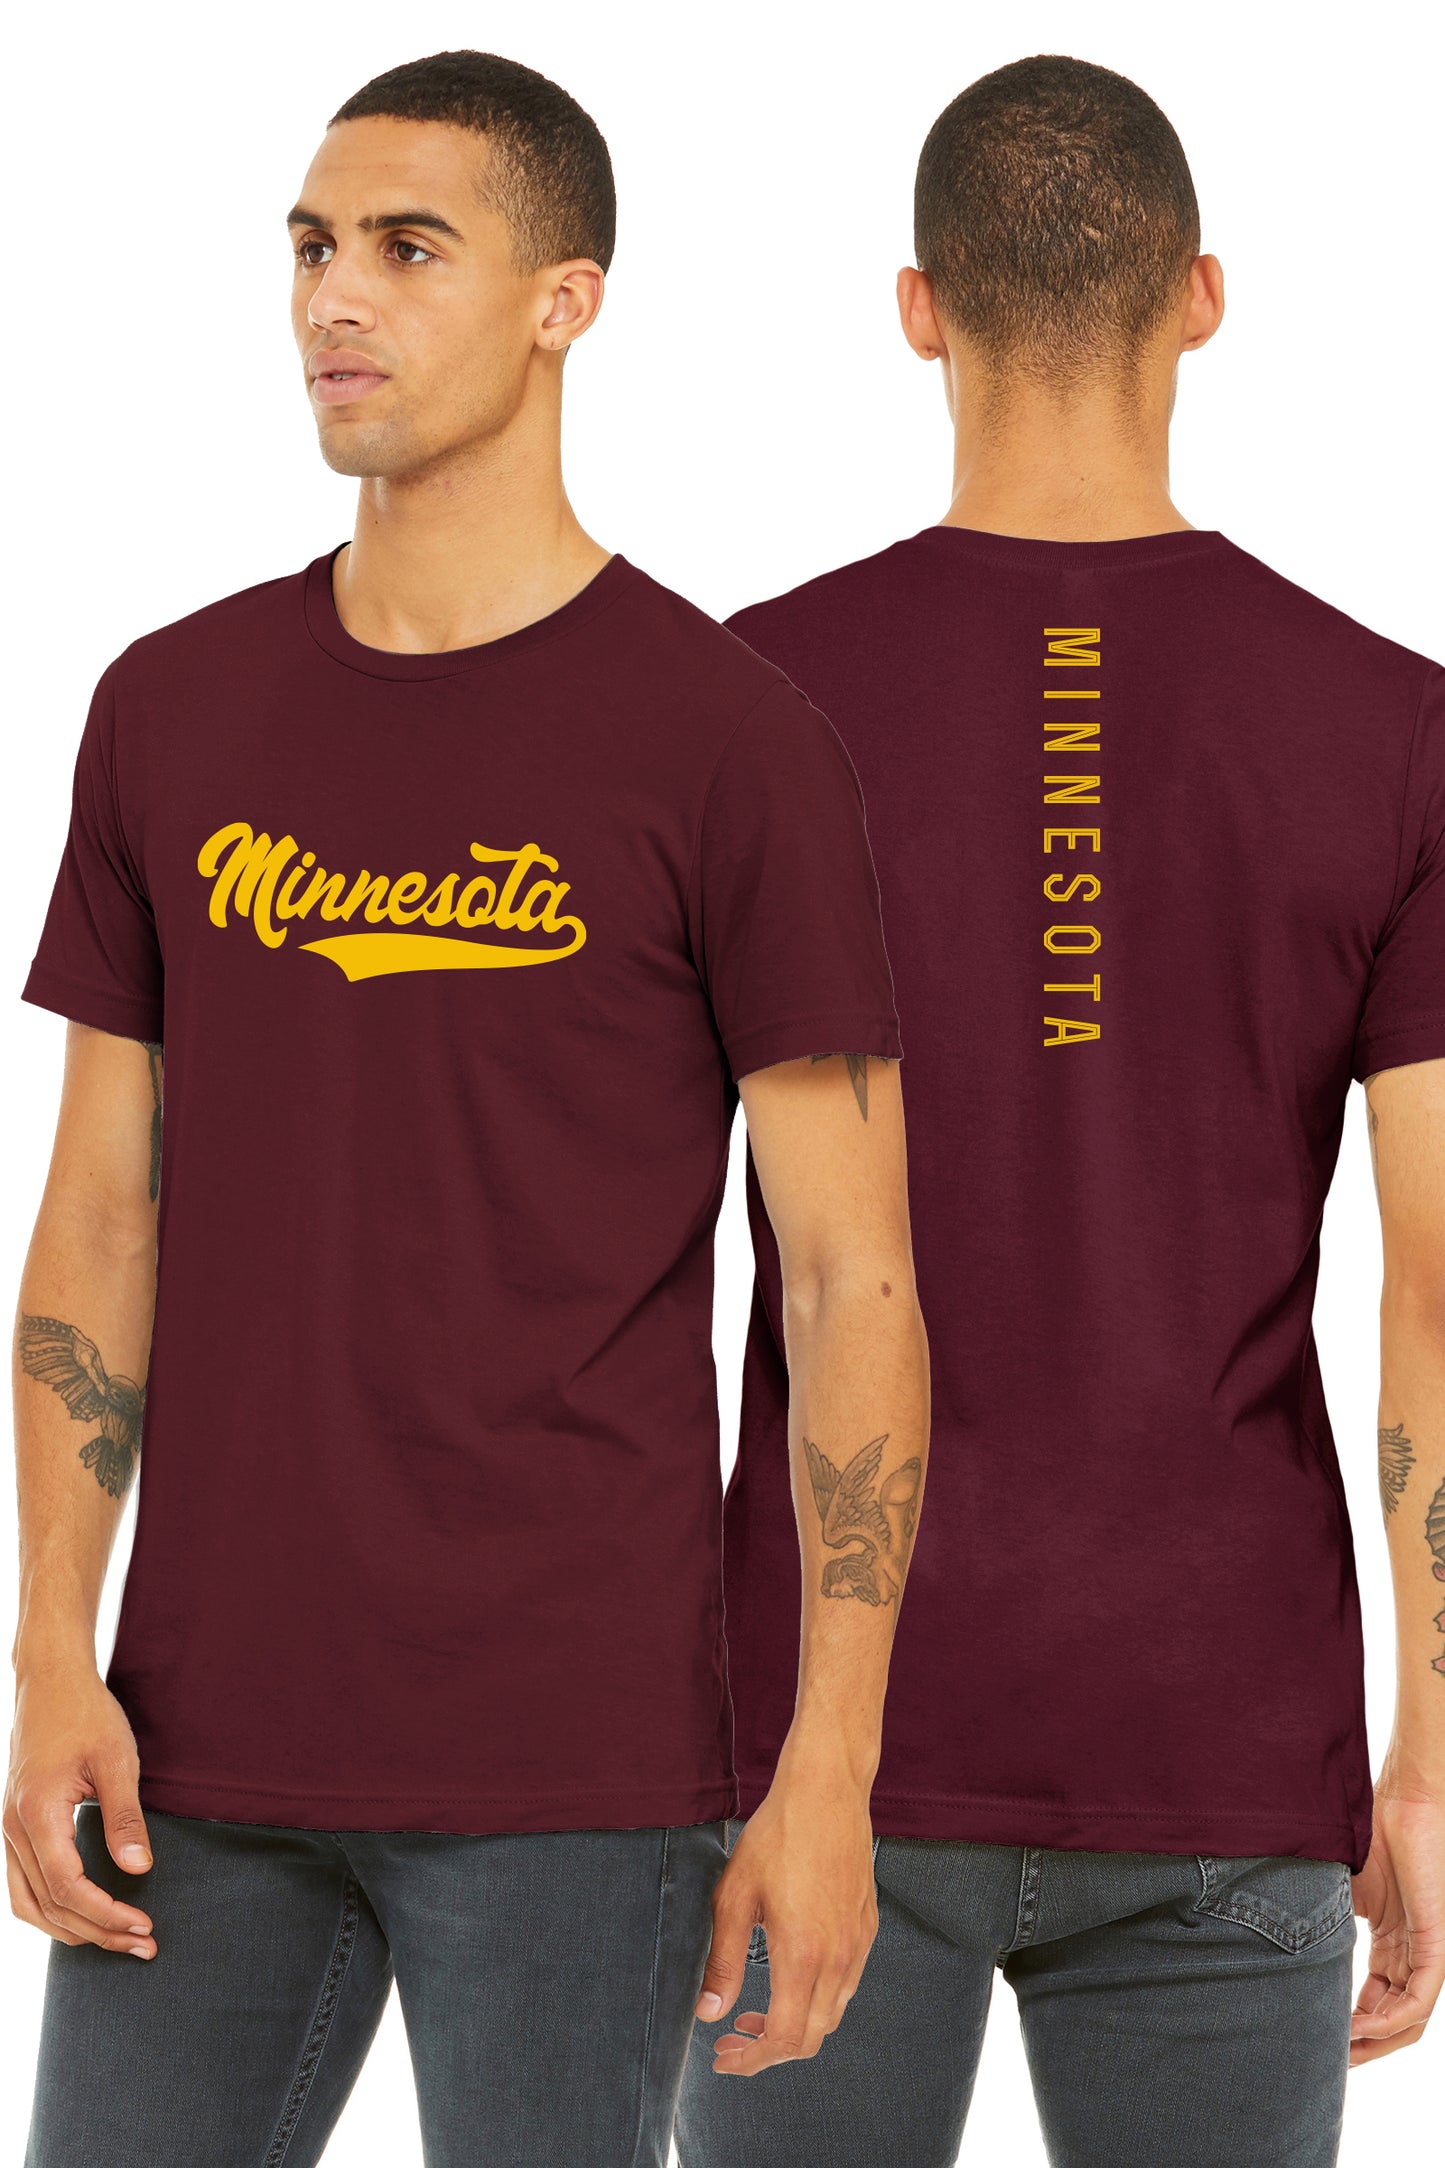 Daxton Adult Unisex Tshirt Minnesota Script with Vertical on the Back